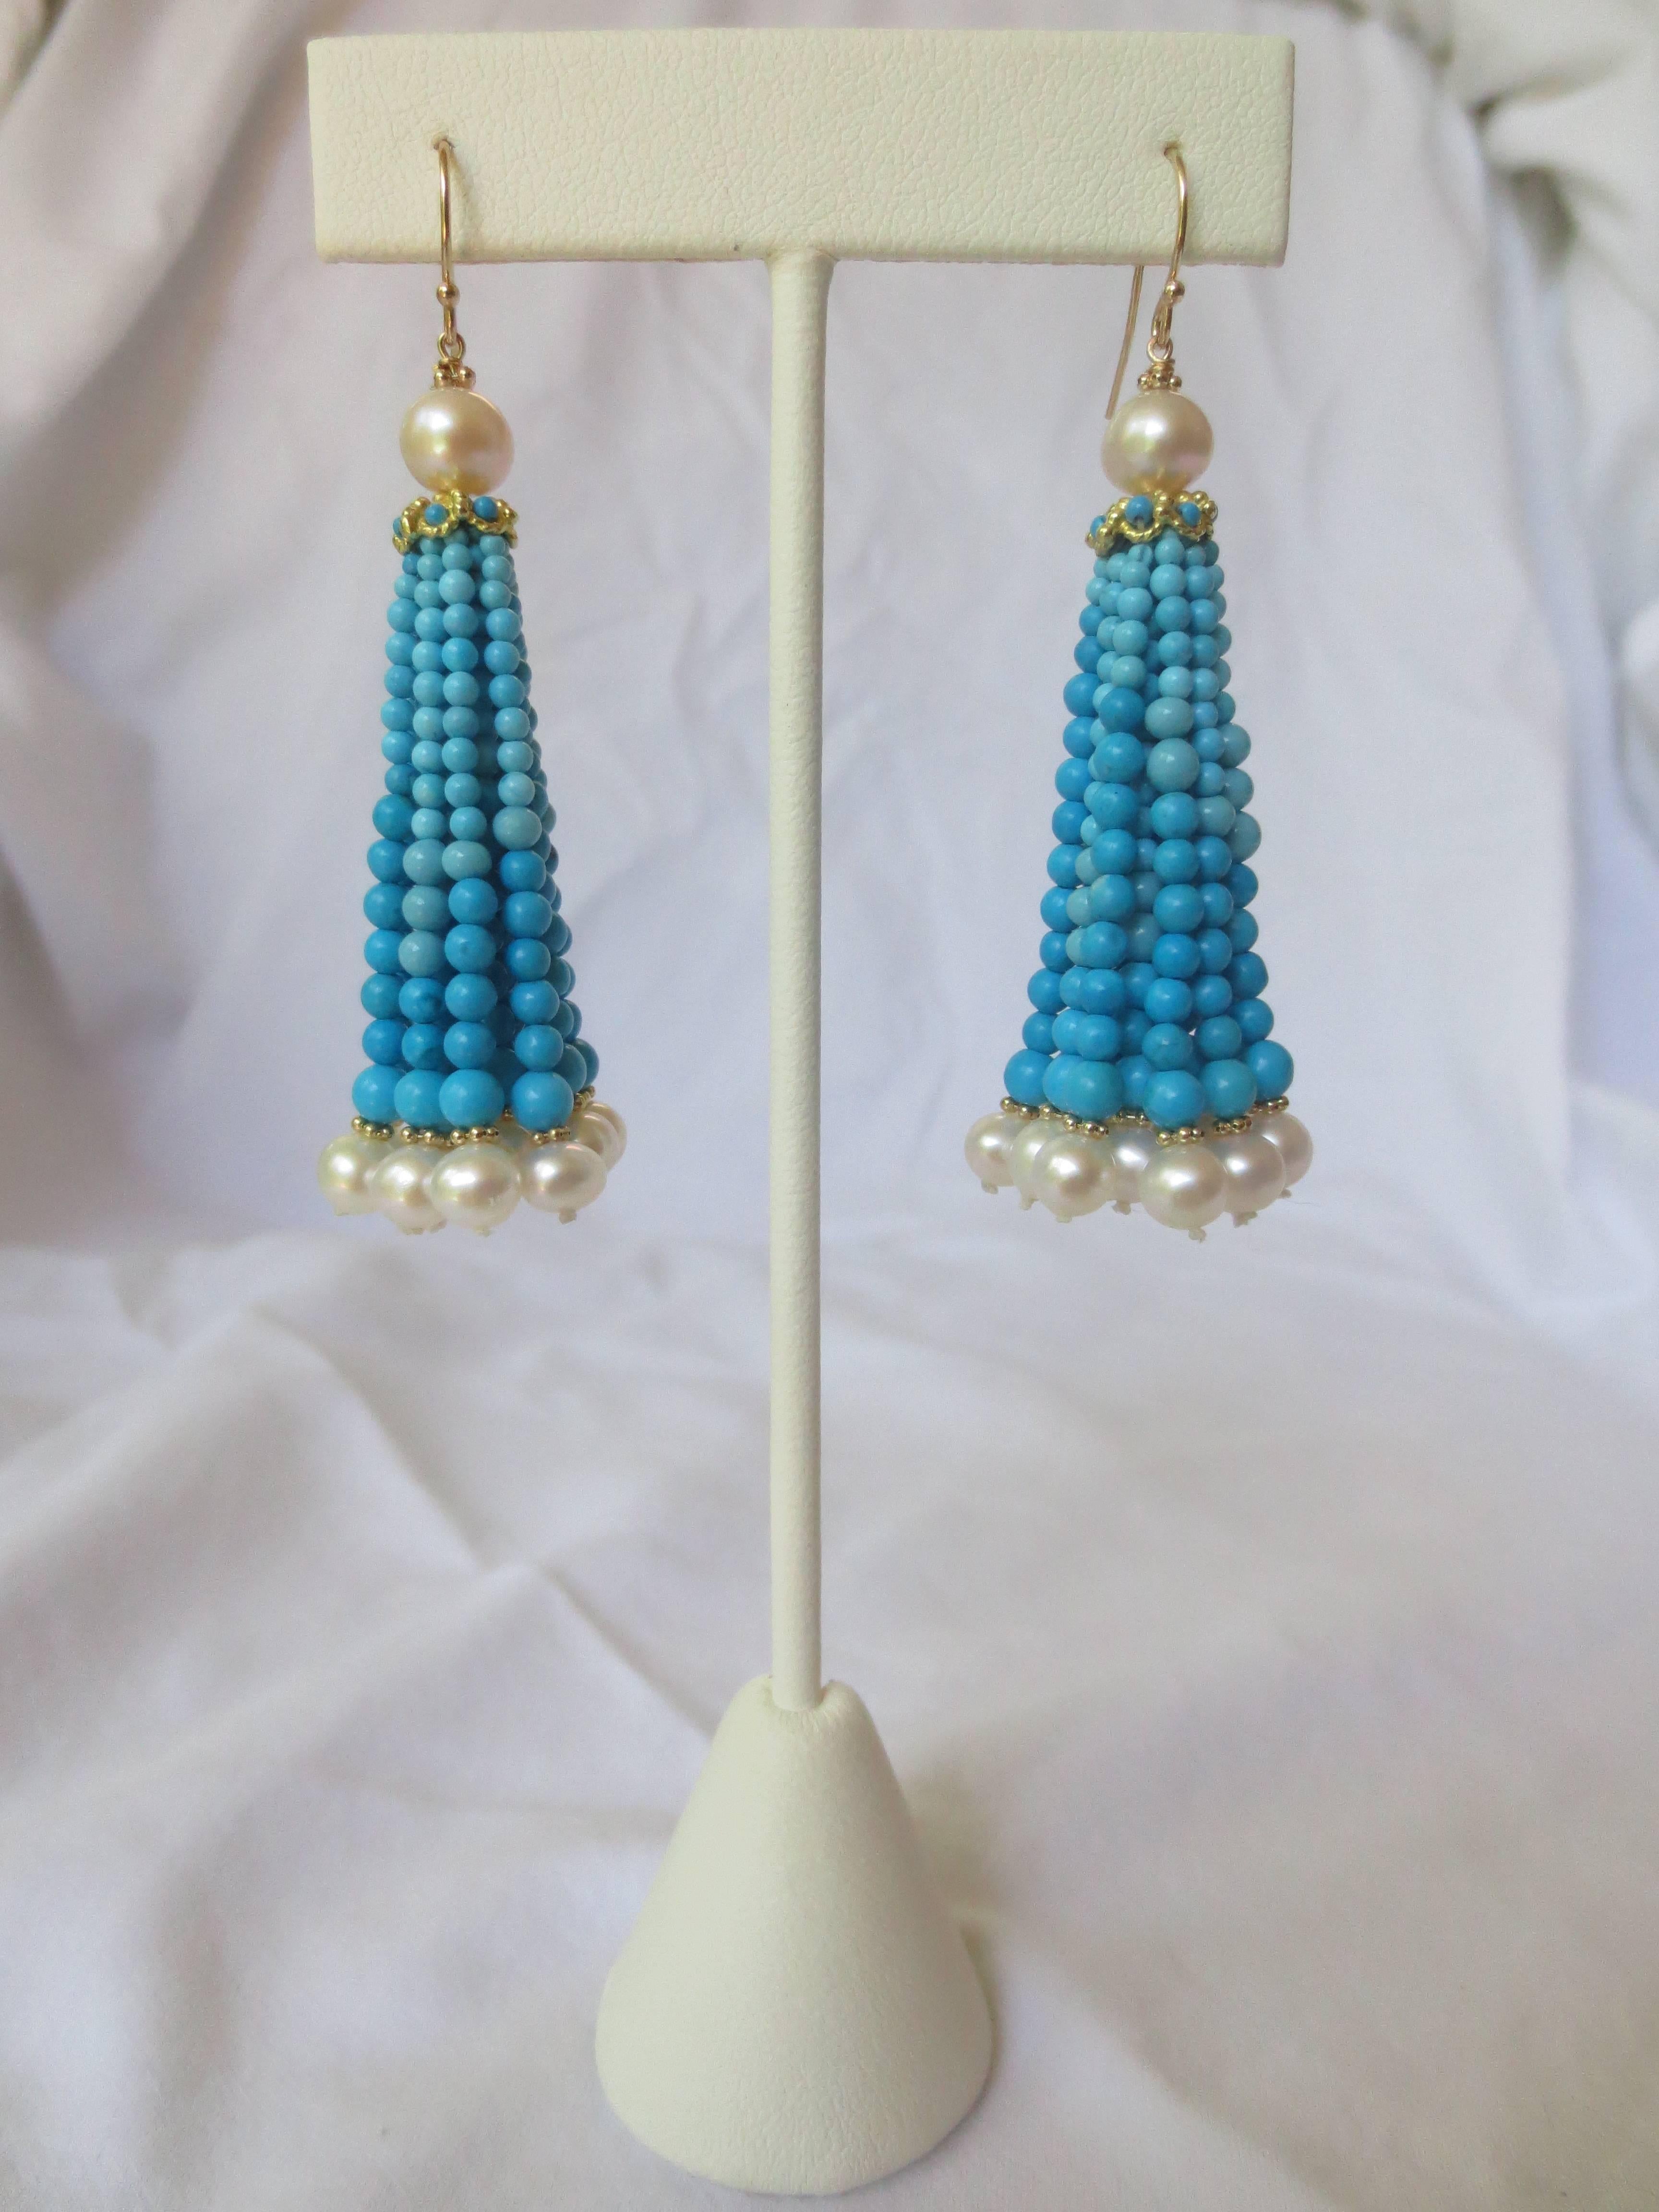 Graduated in size and color gradient, these dangle earrings are sure to brighten any ensemble. Secured with 14 K Gold findings, the 6 mm top pearl is attached to a gold filigree cup, decorated with small beads. The turquoise tassels range from 1